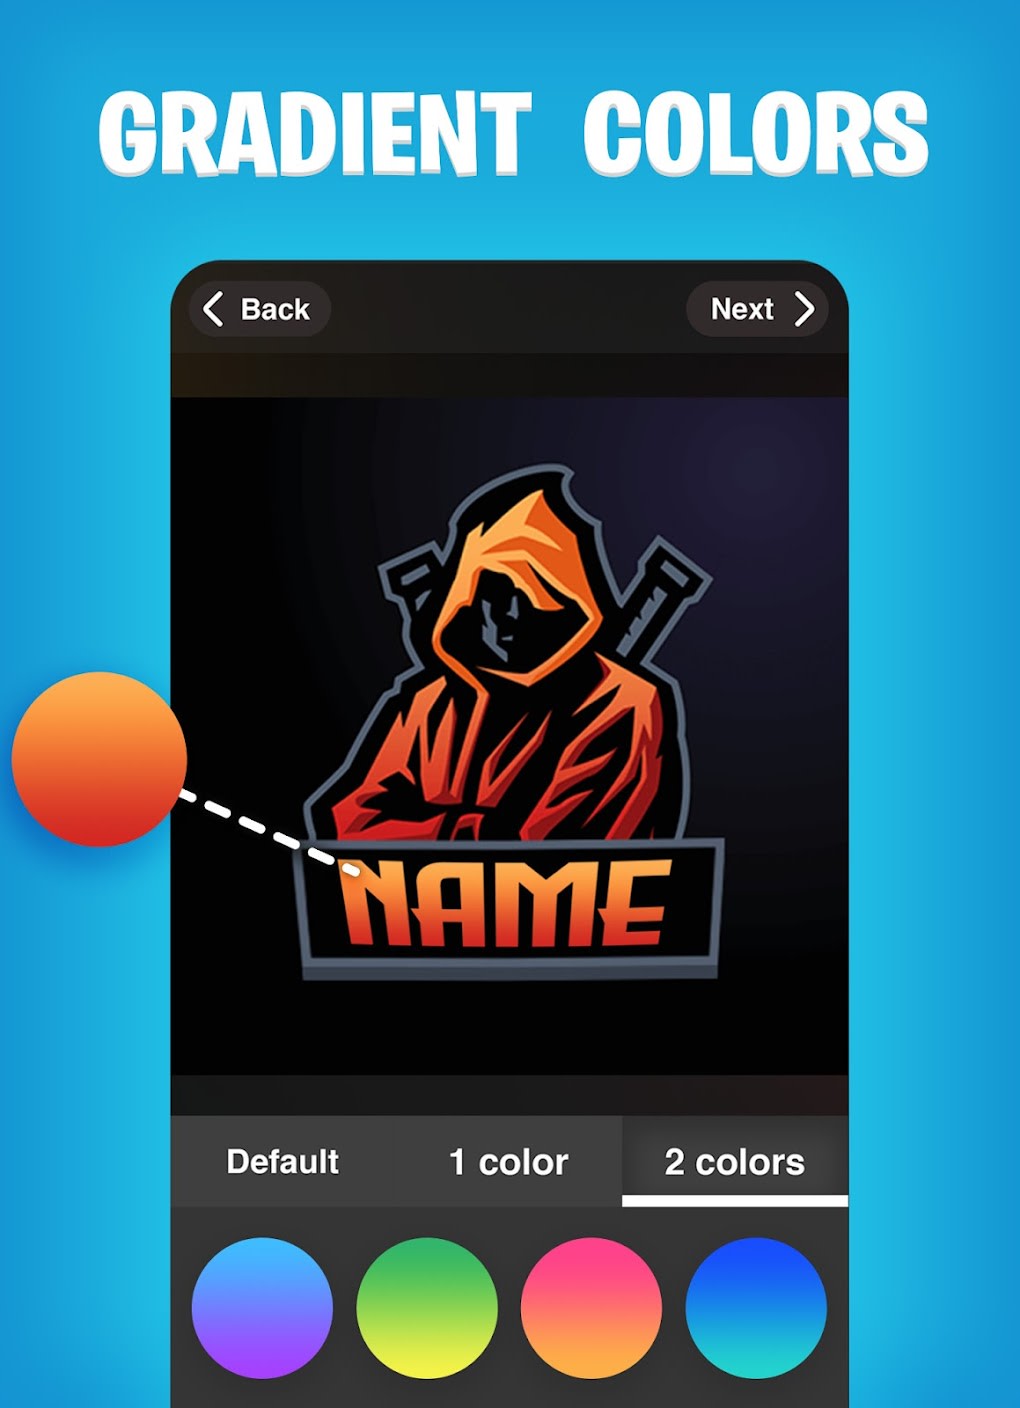 Gaming Logo Maker APK for Android Download